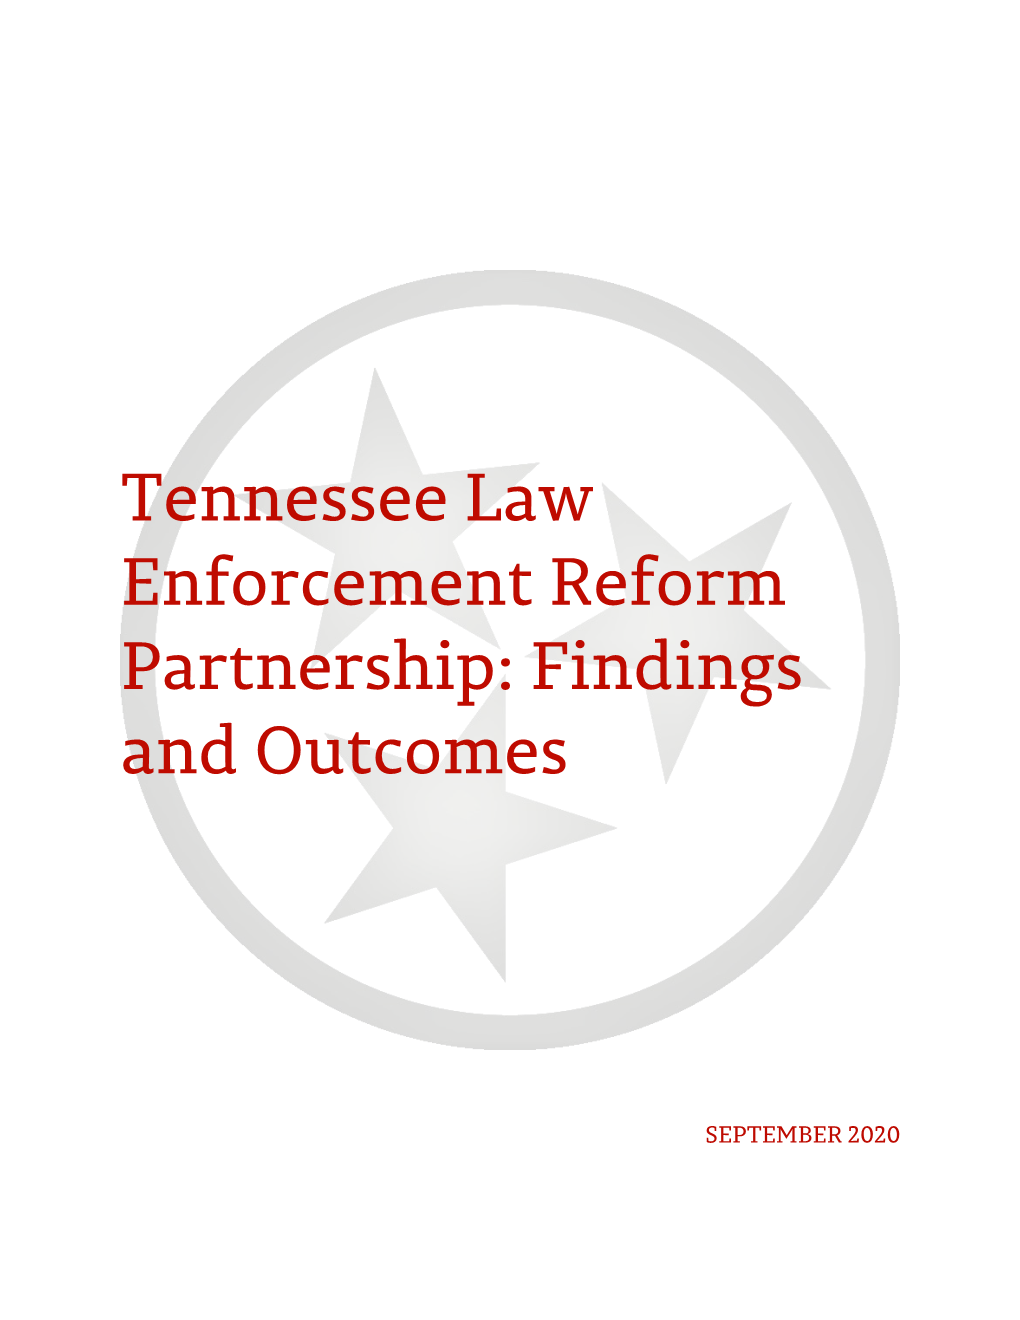 Tennessee Law Enforcement Reform Partnership: Findings and Outcomes